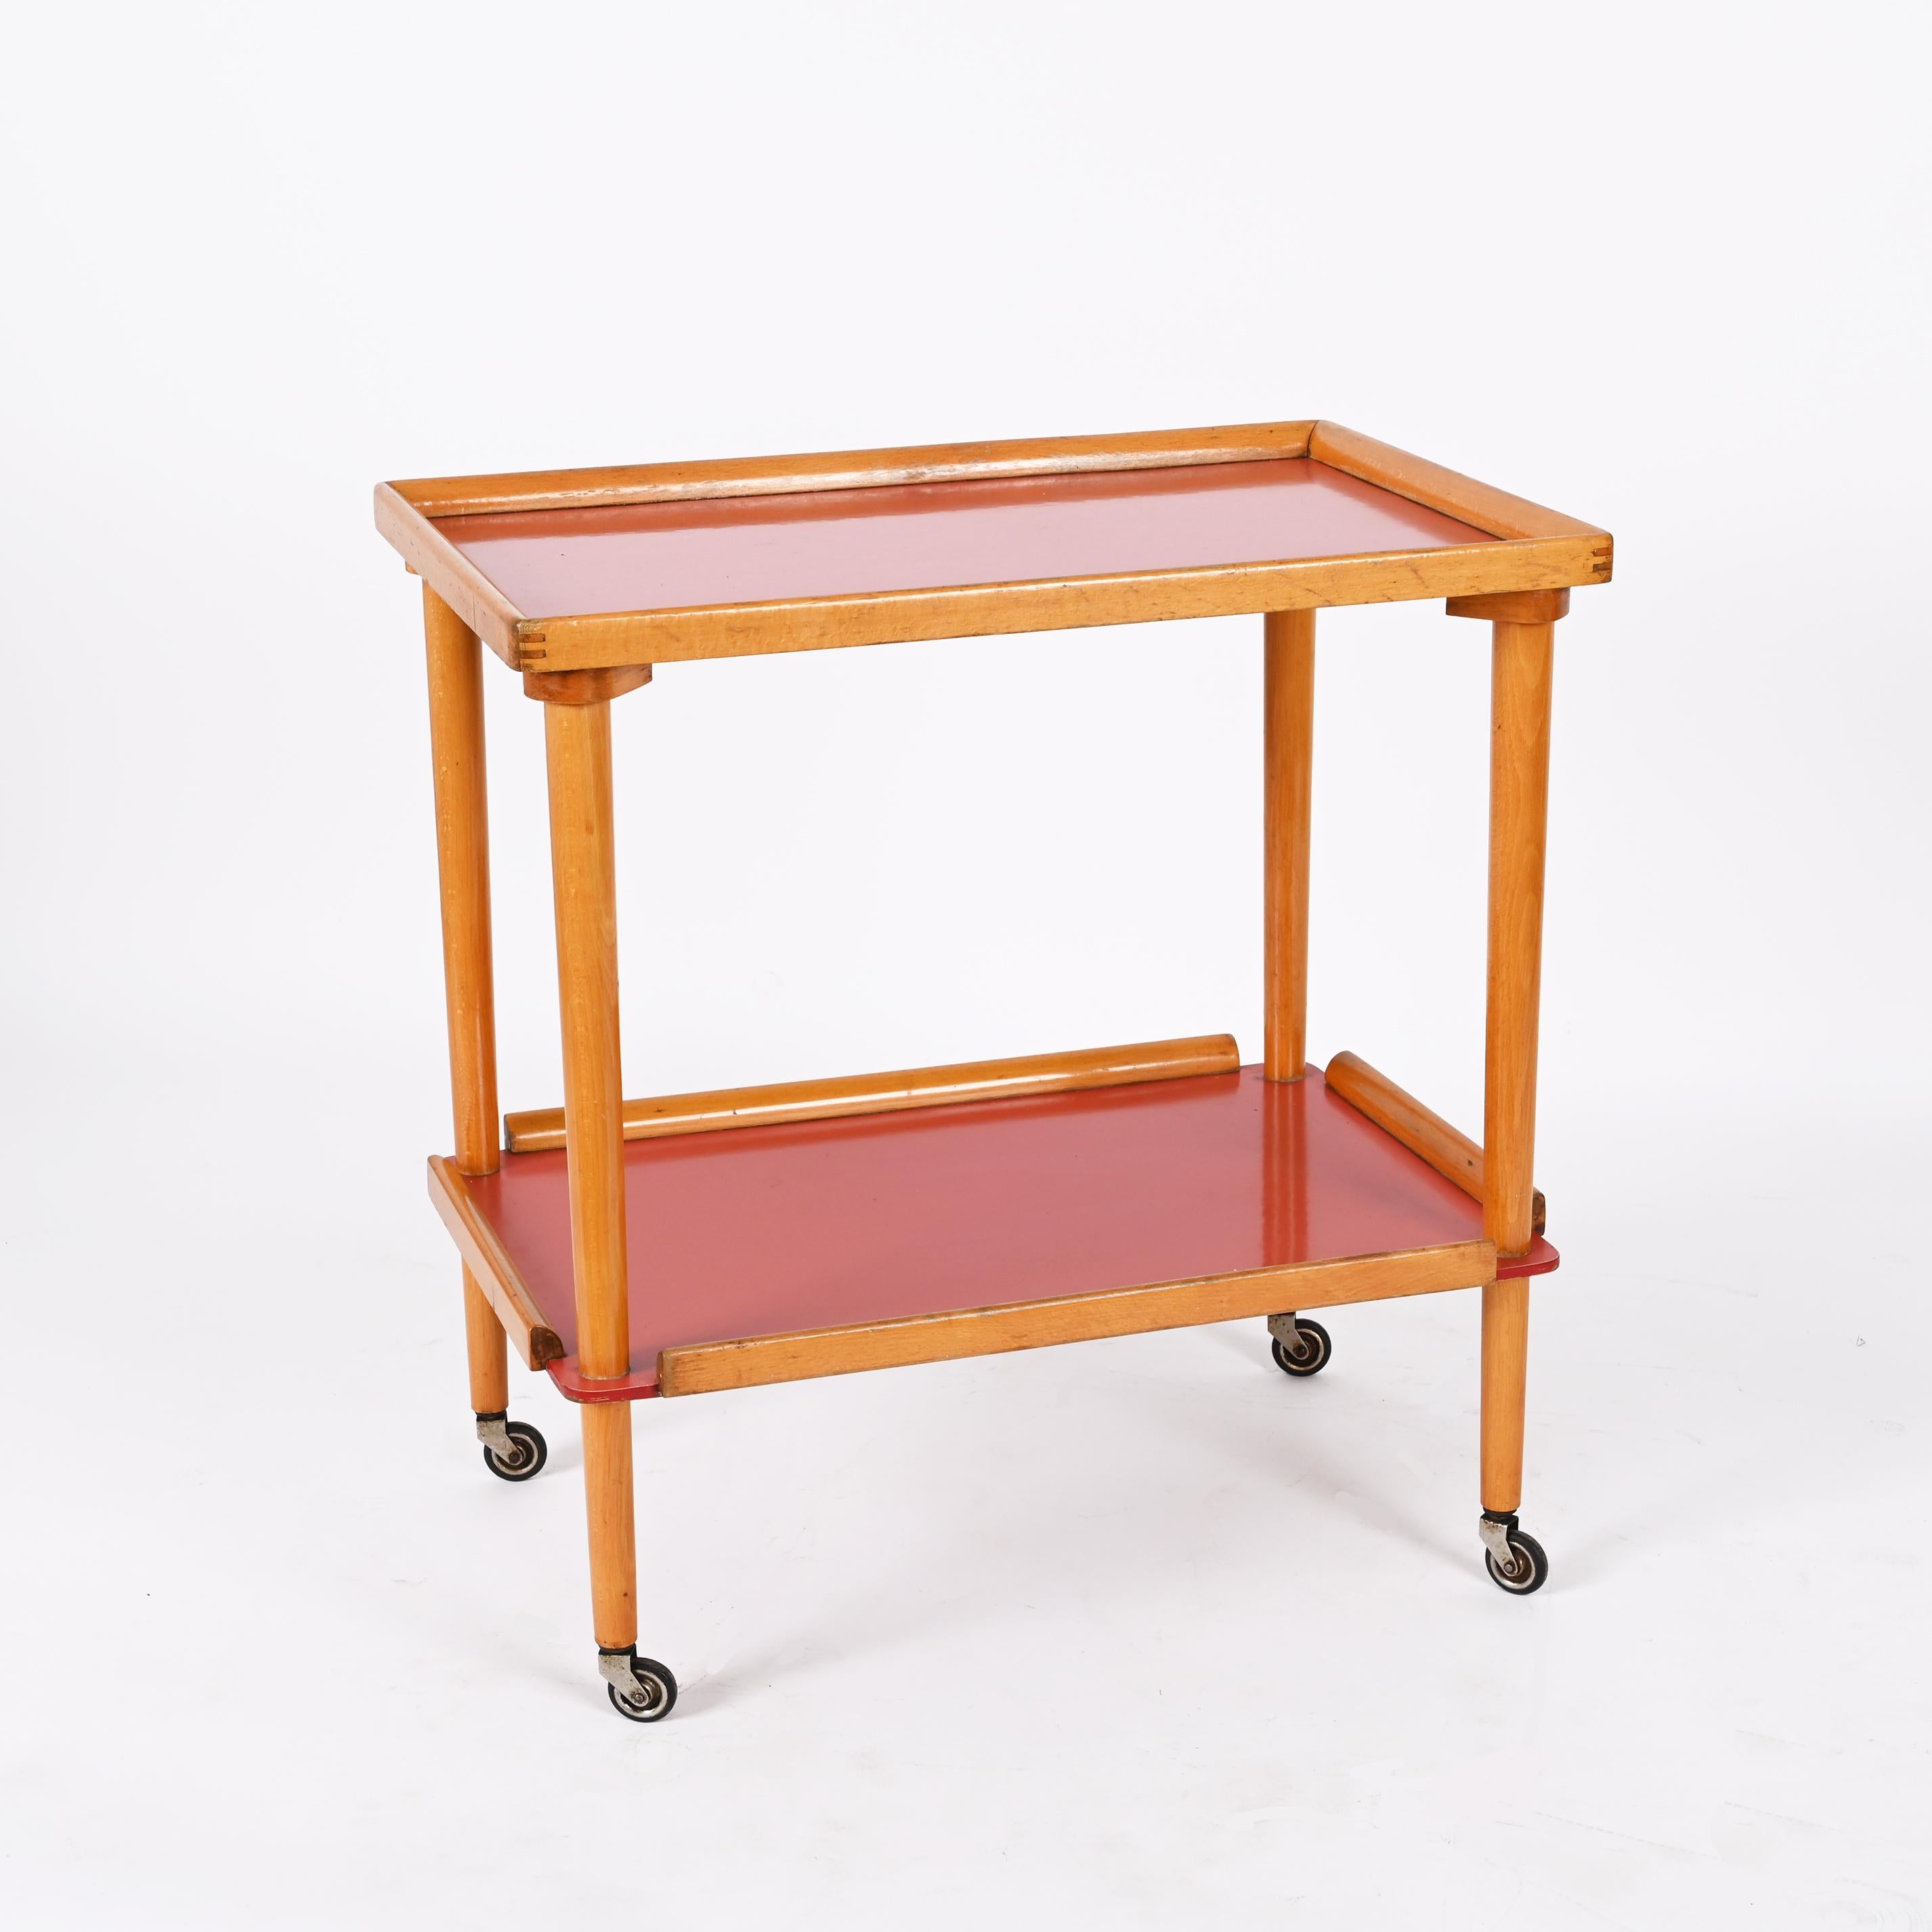 Midcentury Italian Beech Wood and Formica Red Two Tiered Bar Cart, 1960s For Sale 3